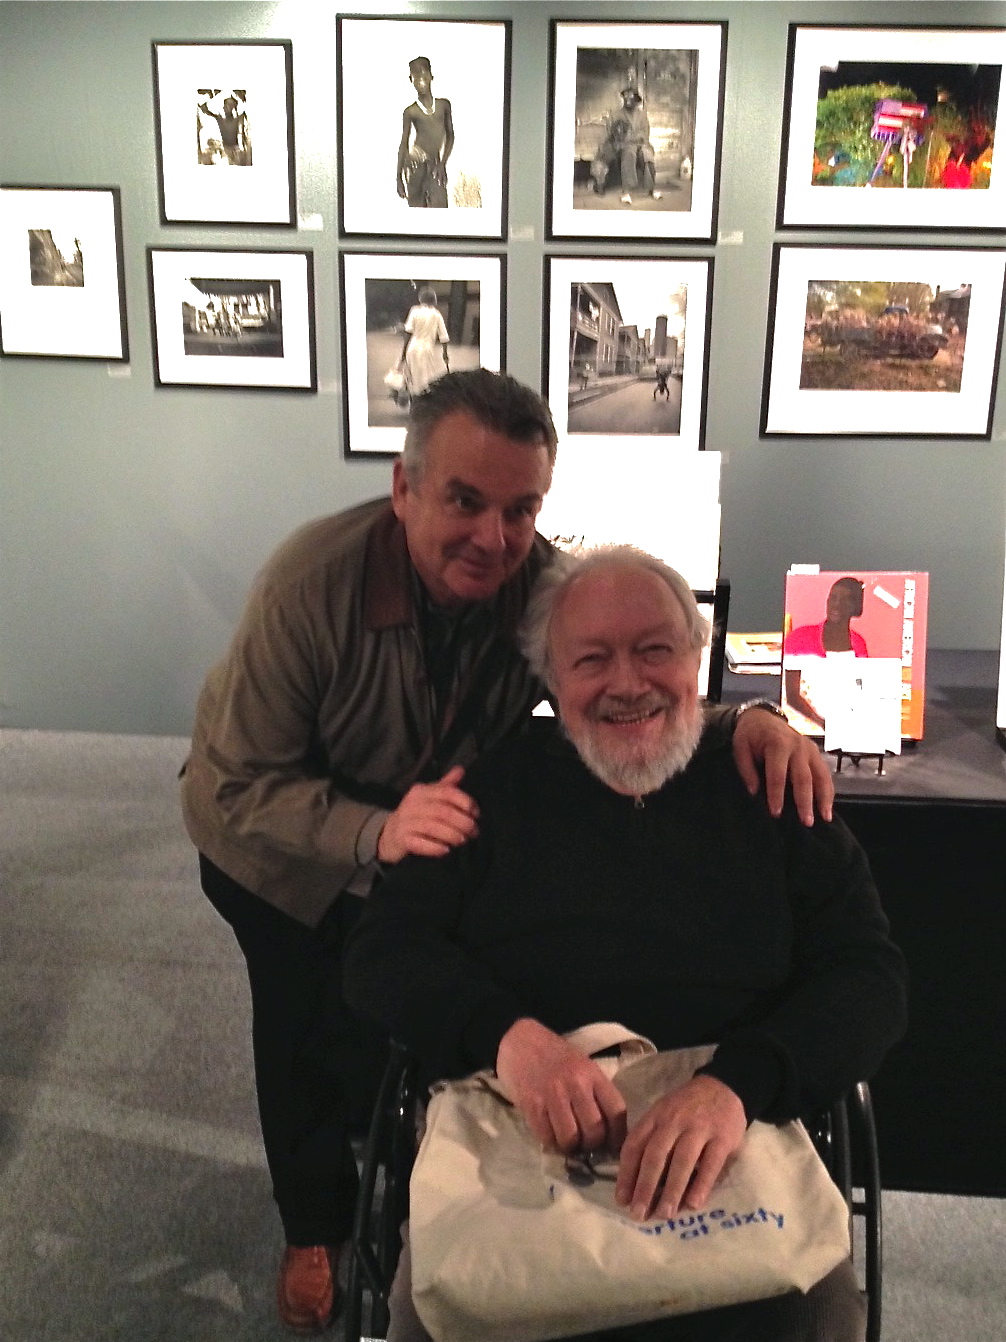 Here I am with Burt Finger from Photos Do Not Bend